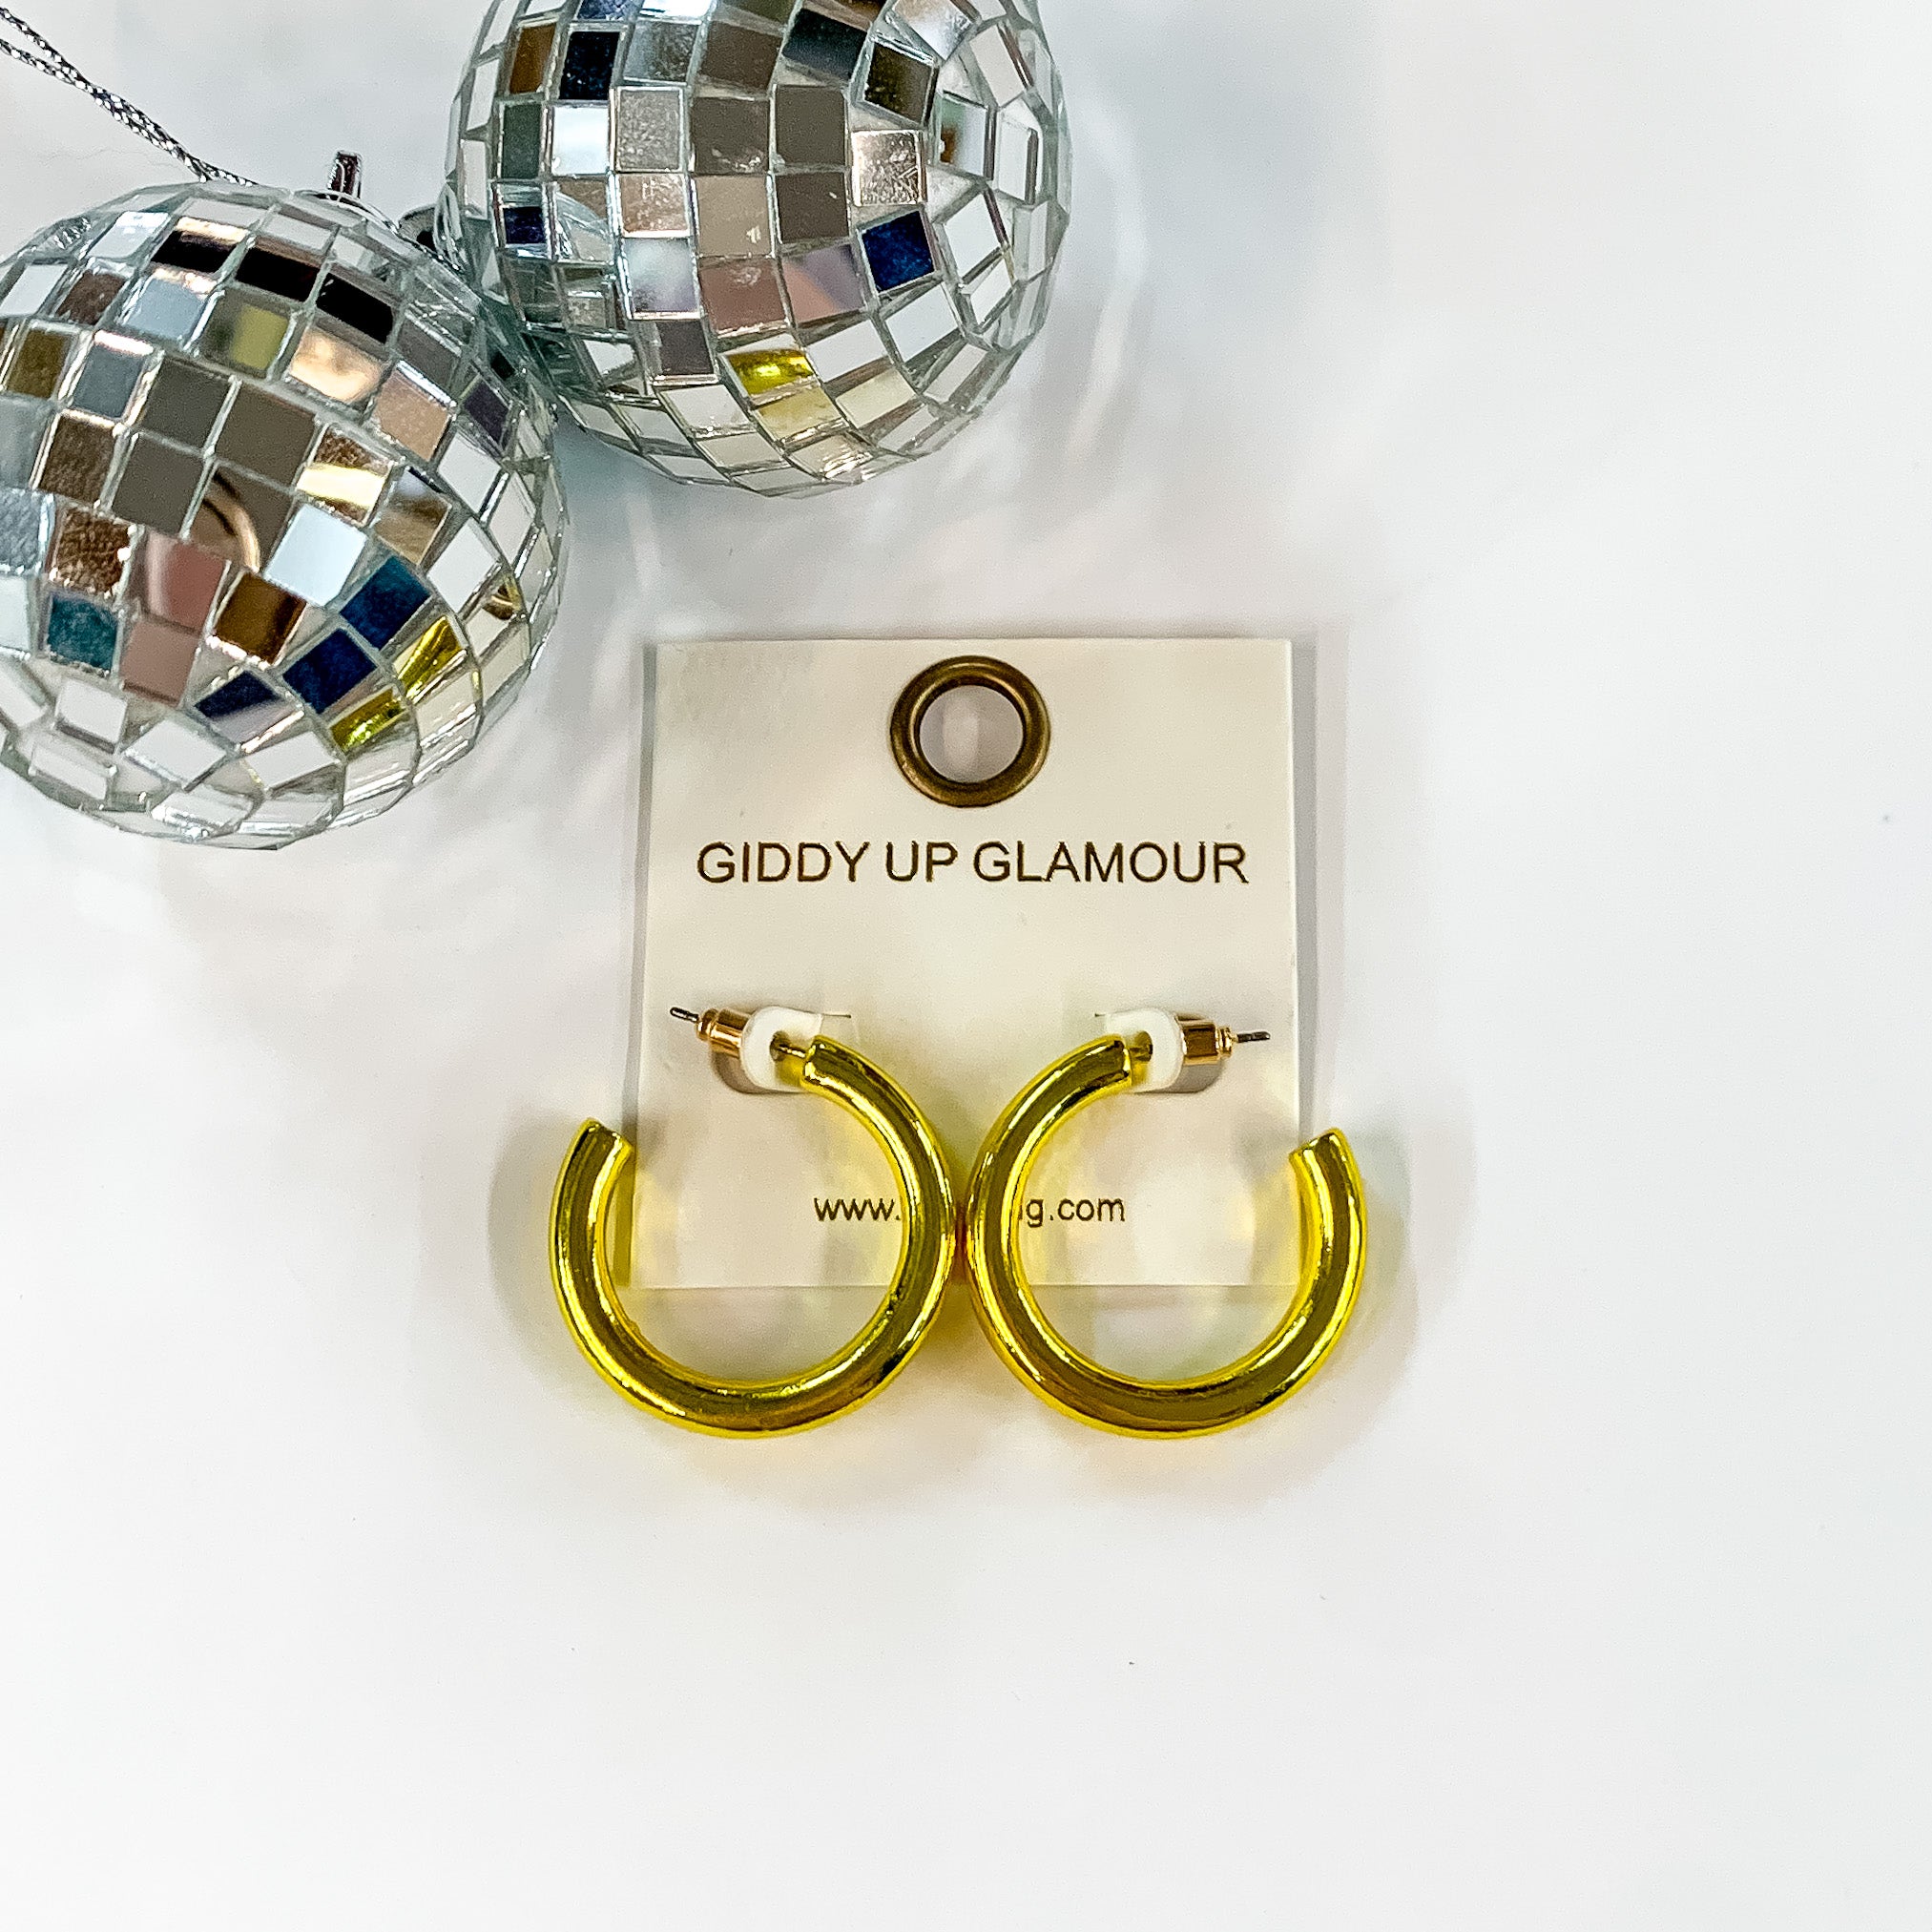 Light Up Small Neon Hoop Earrings In Yellow. Pictured on a white background with disco balls in the top left corner.